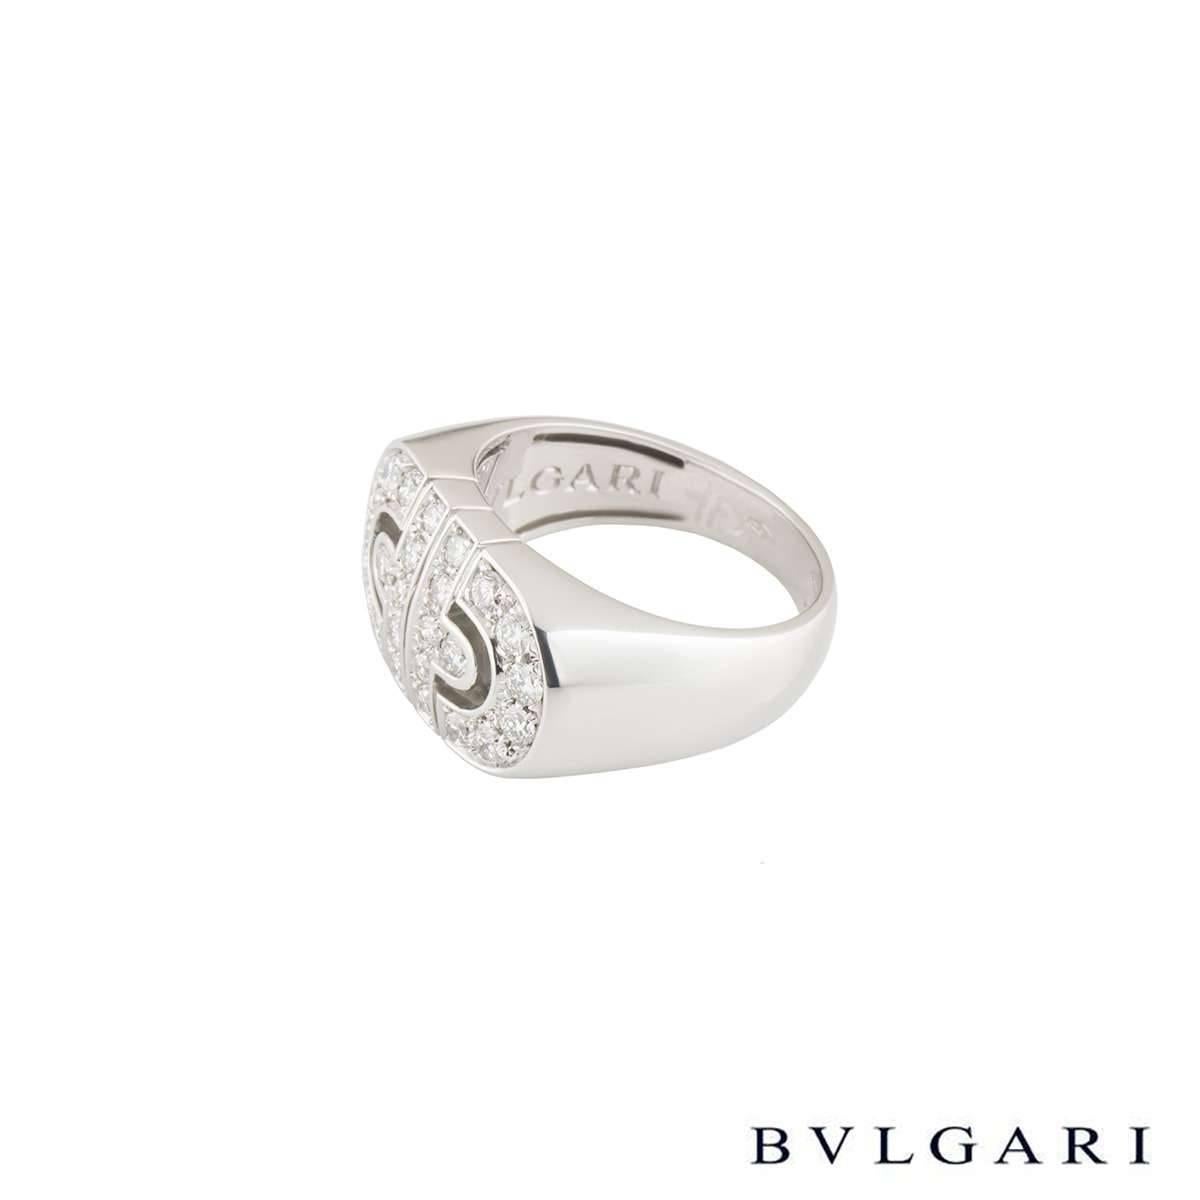 A lovely 18k white gold Bvlgari diamond dress ring from the Parentesi collection. The ring comprises of the Parentesi motif with round brilliant cut diamonds in a pave setting. The ring is set with 24 round brilliant cut diamonds totalling 0.72ct, G